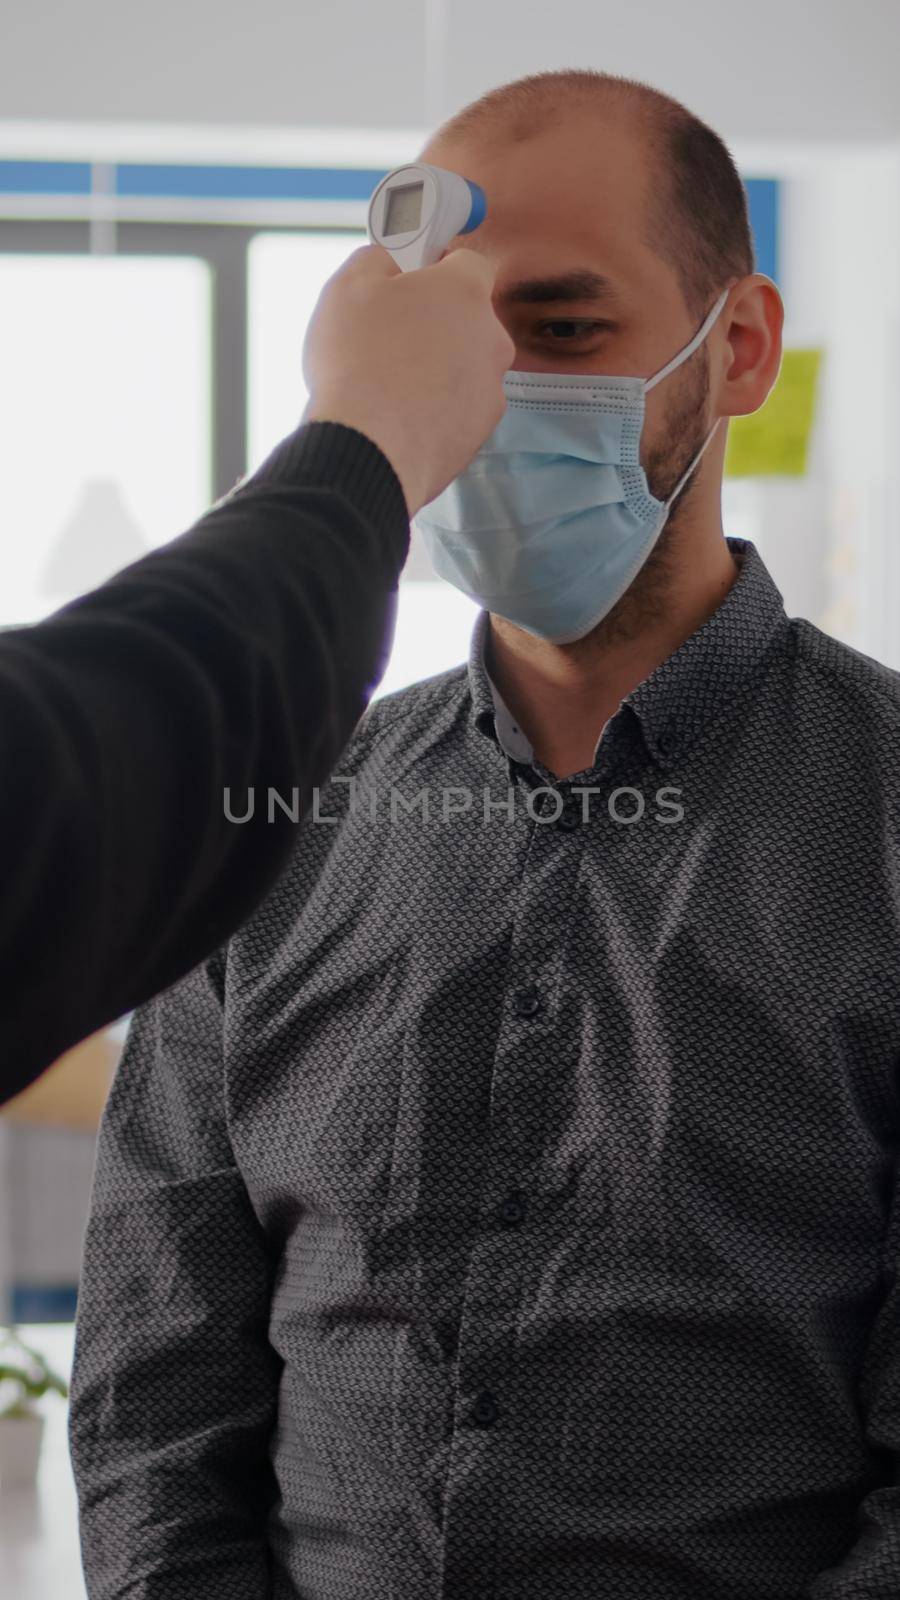 Freelancer man wearing protective mask against covid19 while checking temperature using medical thermometer to avoid infection with coronavirus. Company taking precautions during global pandemic